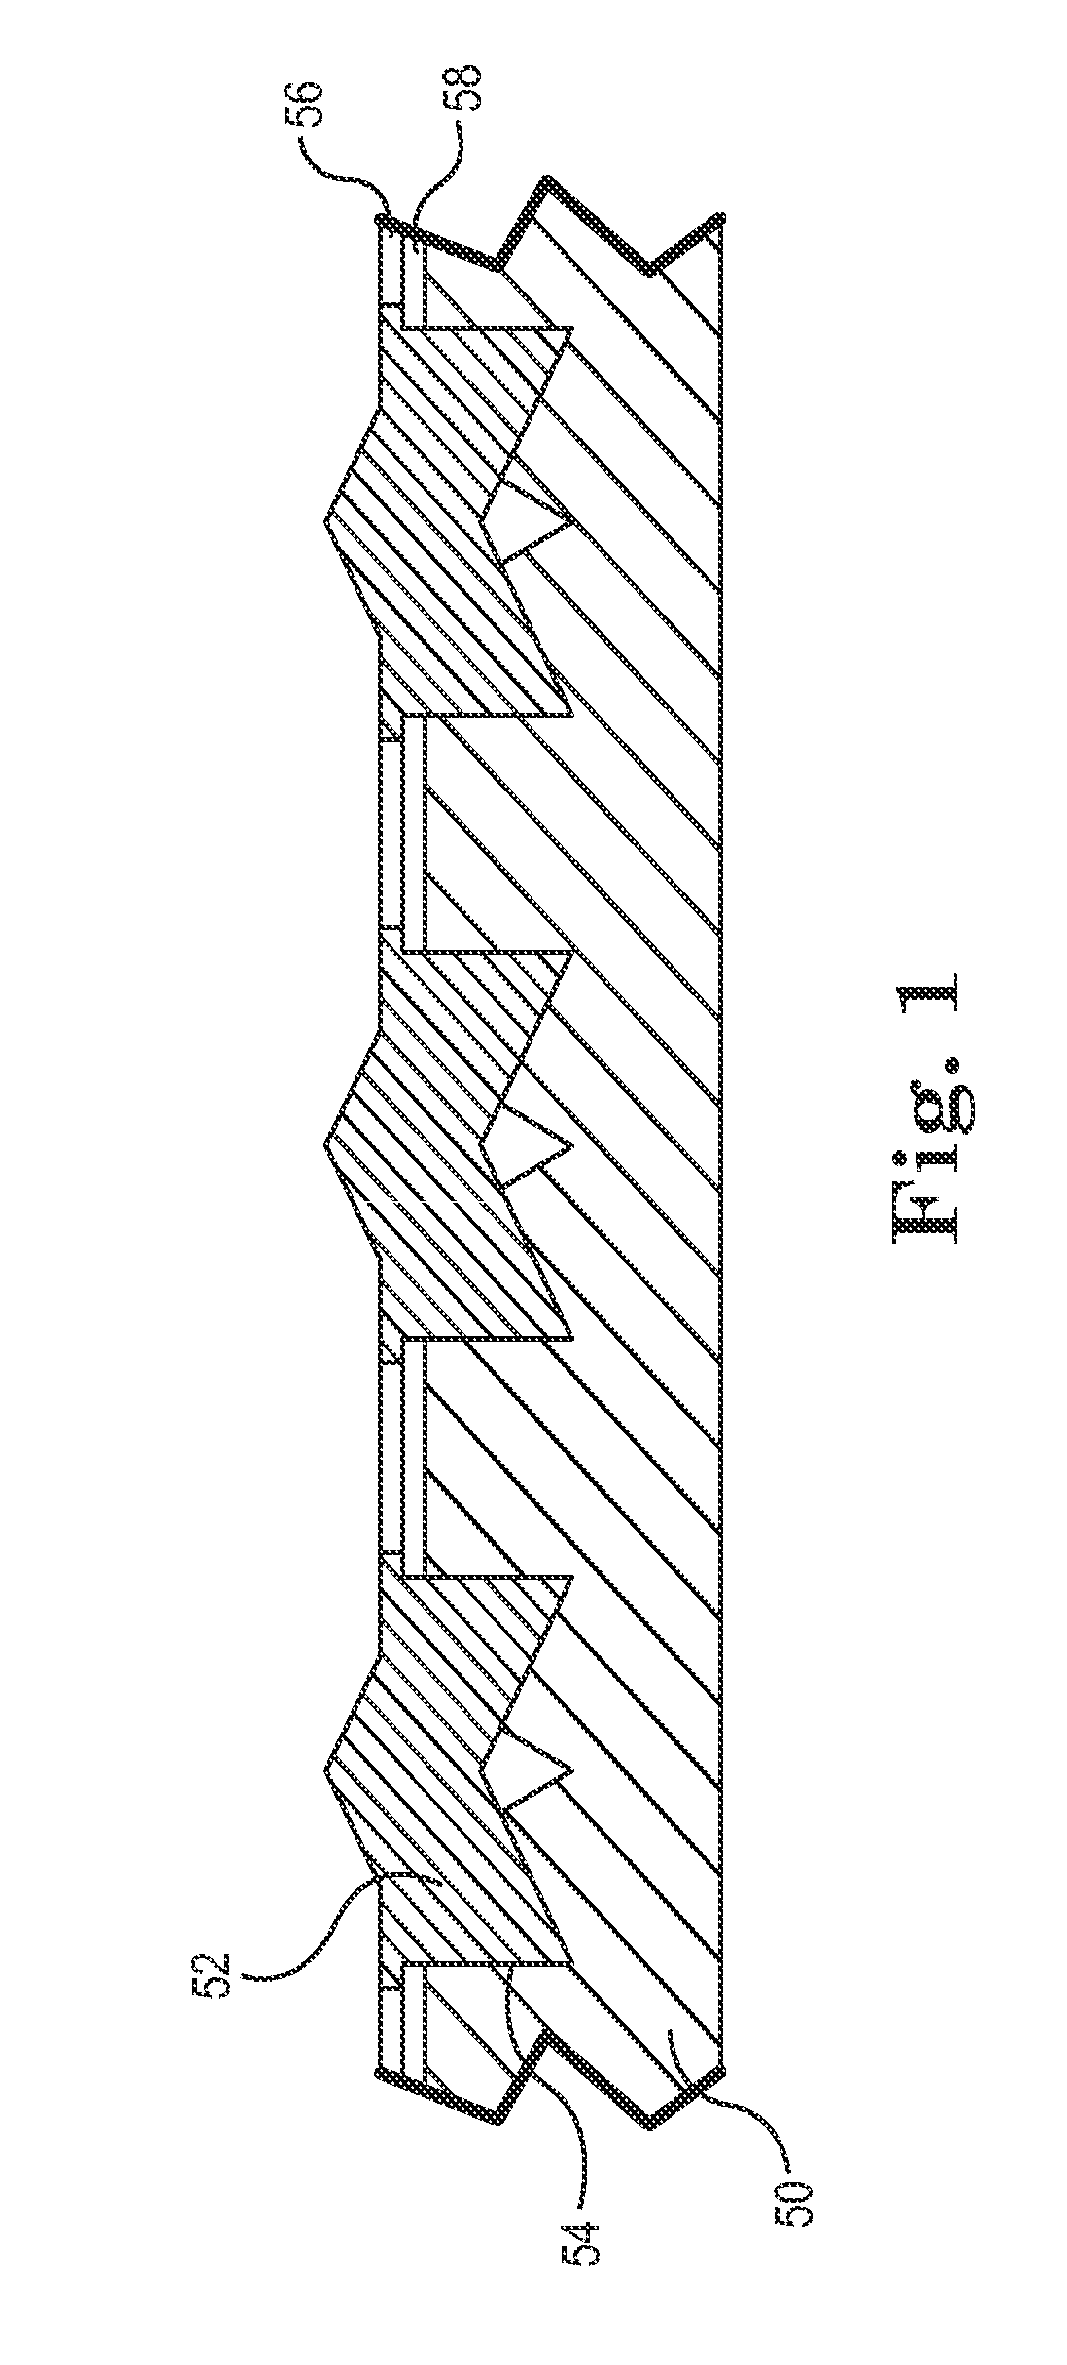 Resilient conductive electrical interconnect